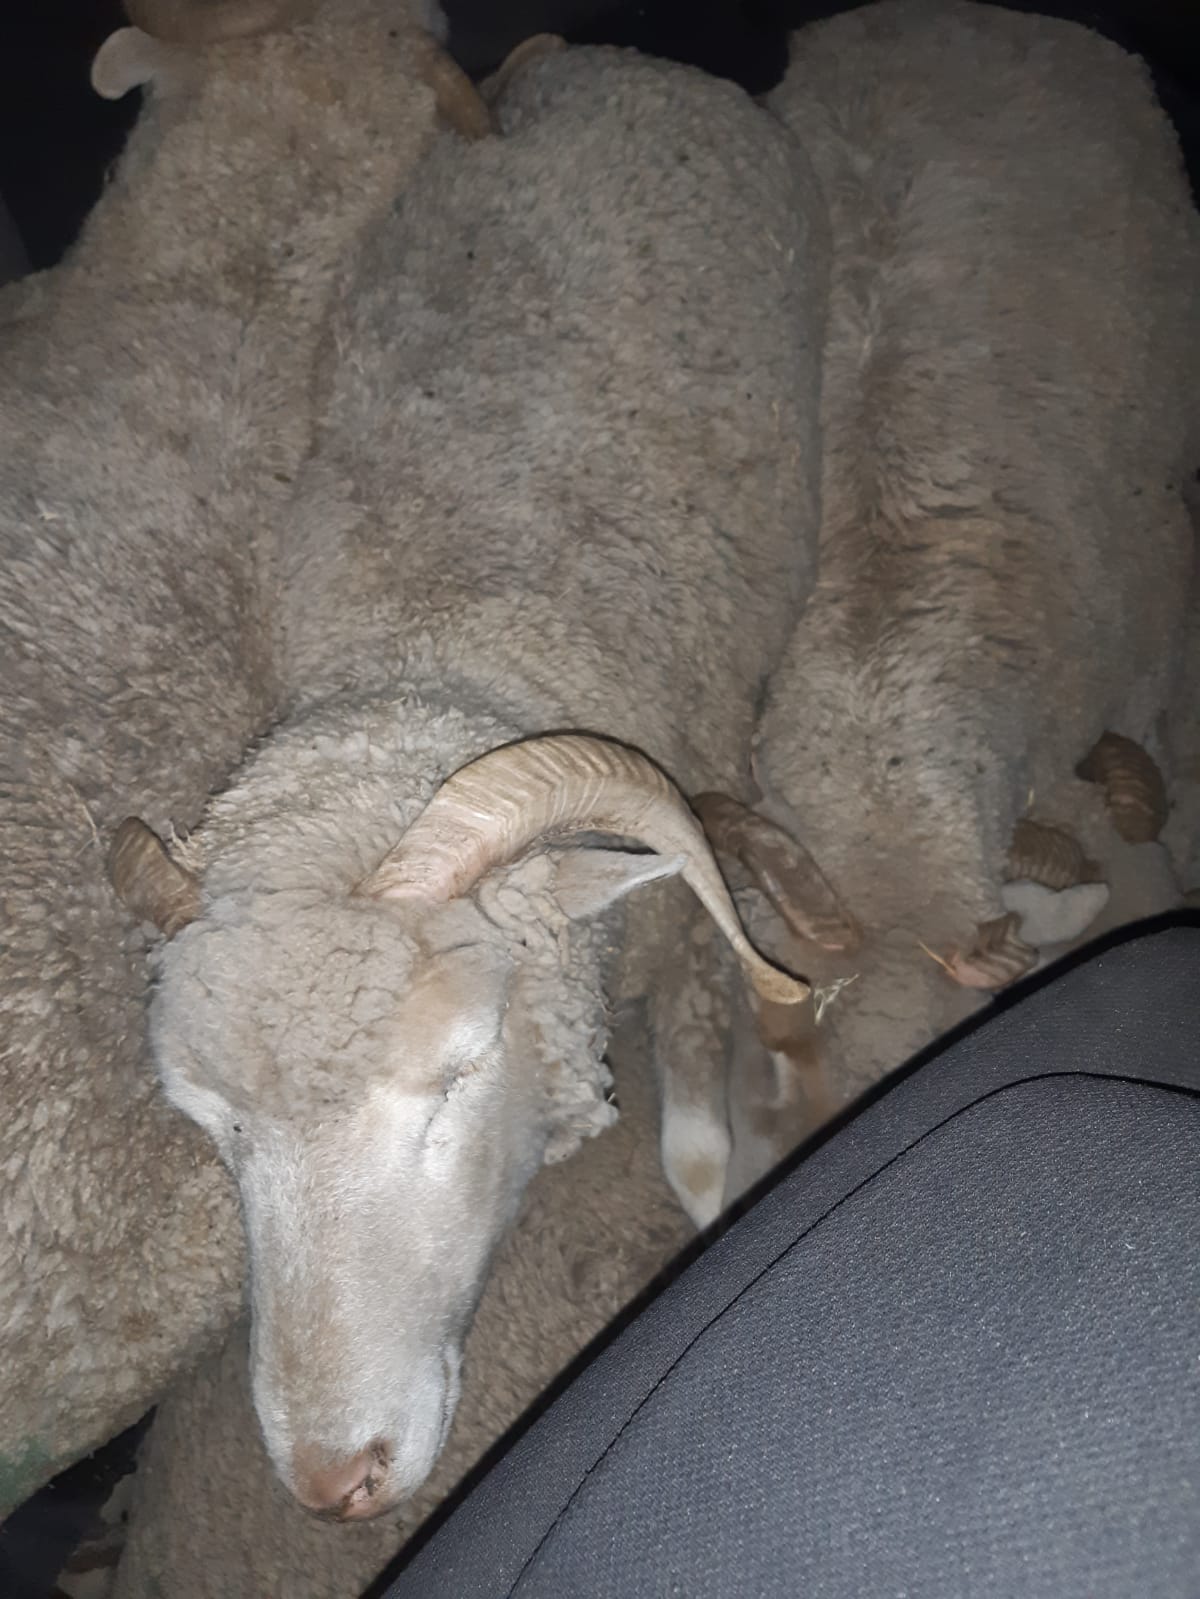 A 37-year-old male suspect was arrested after he was found with ten live sheep - Eastern Cape